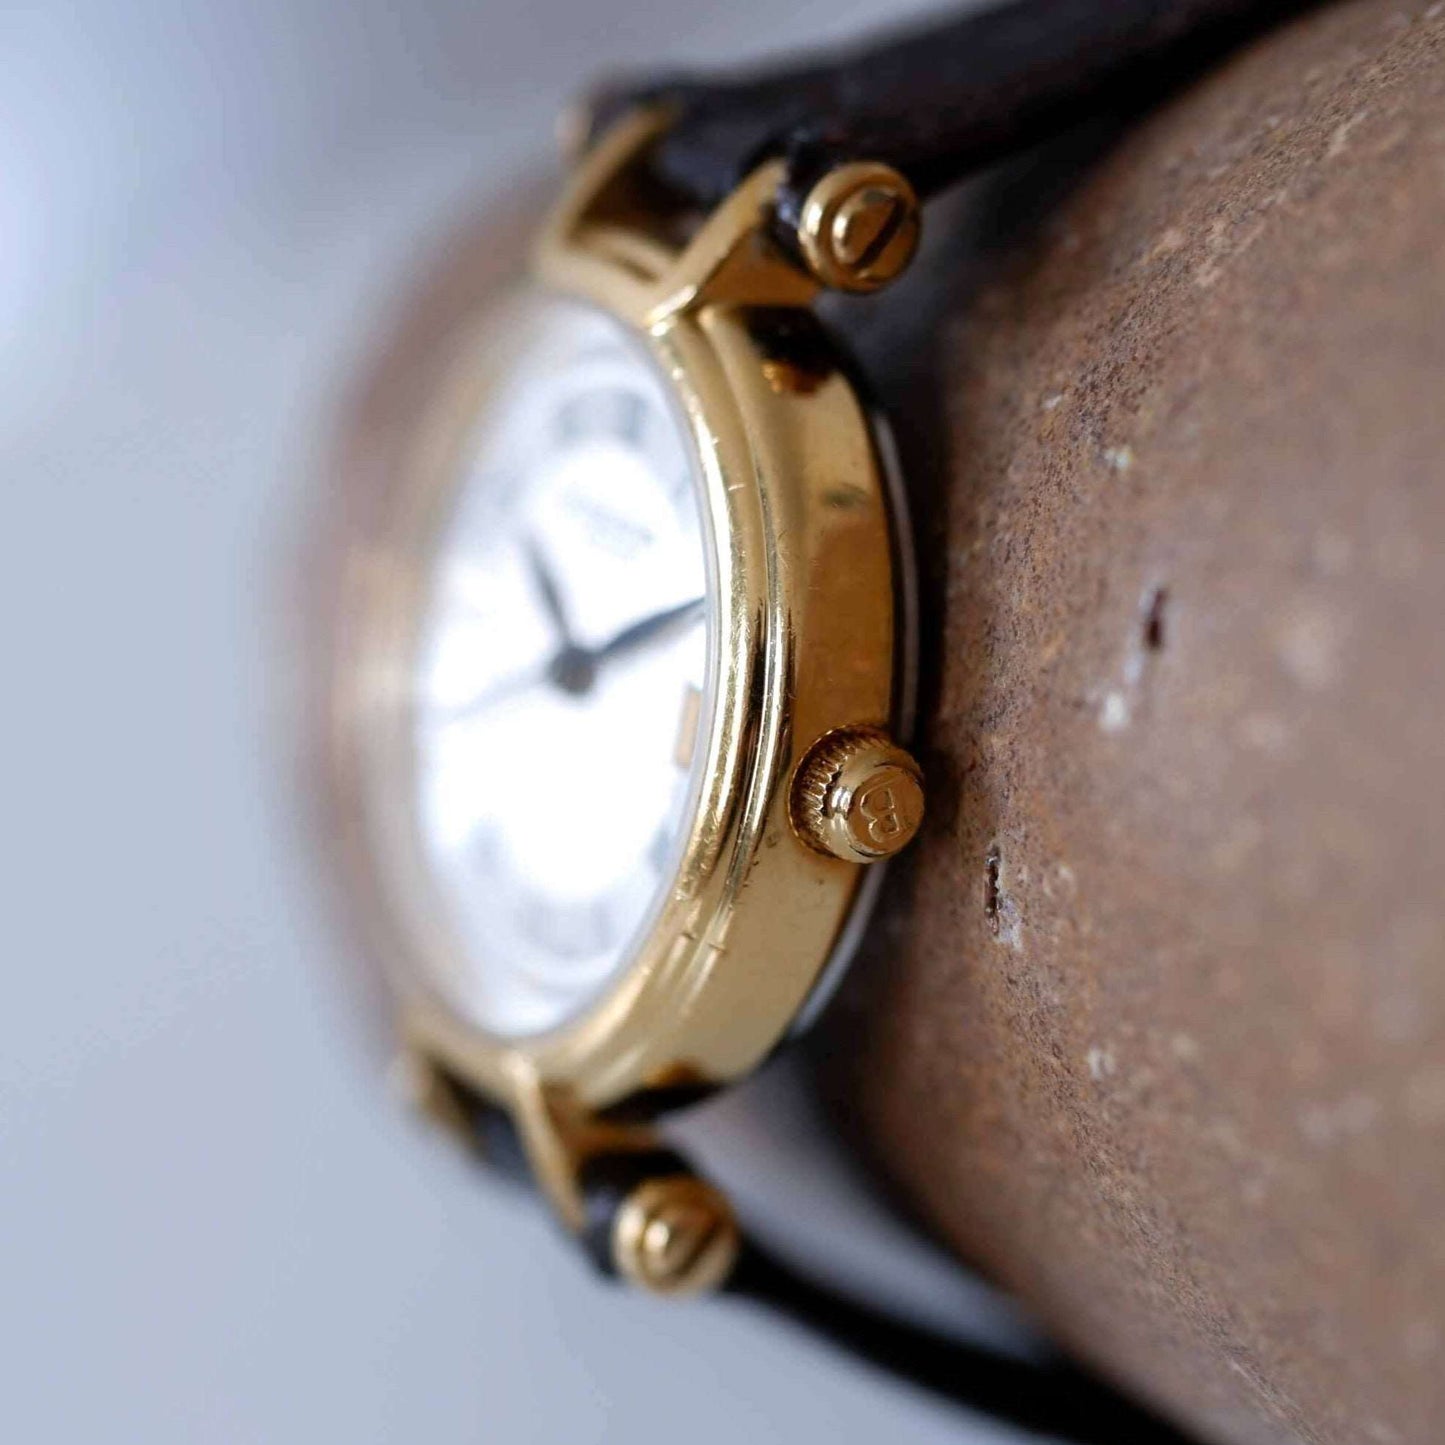 Burberry Vintage Ladies Watch: 90s Golden, Roman Numerals, Guilloche Dial | Side View Right